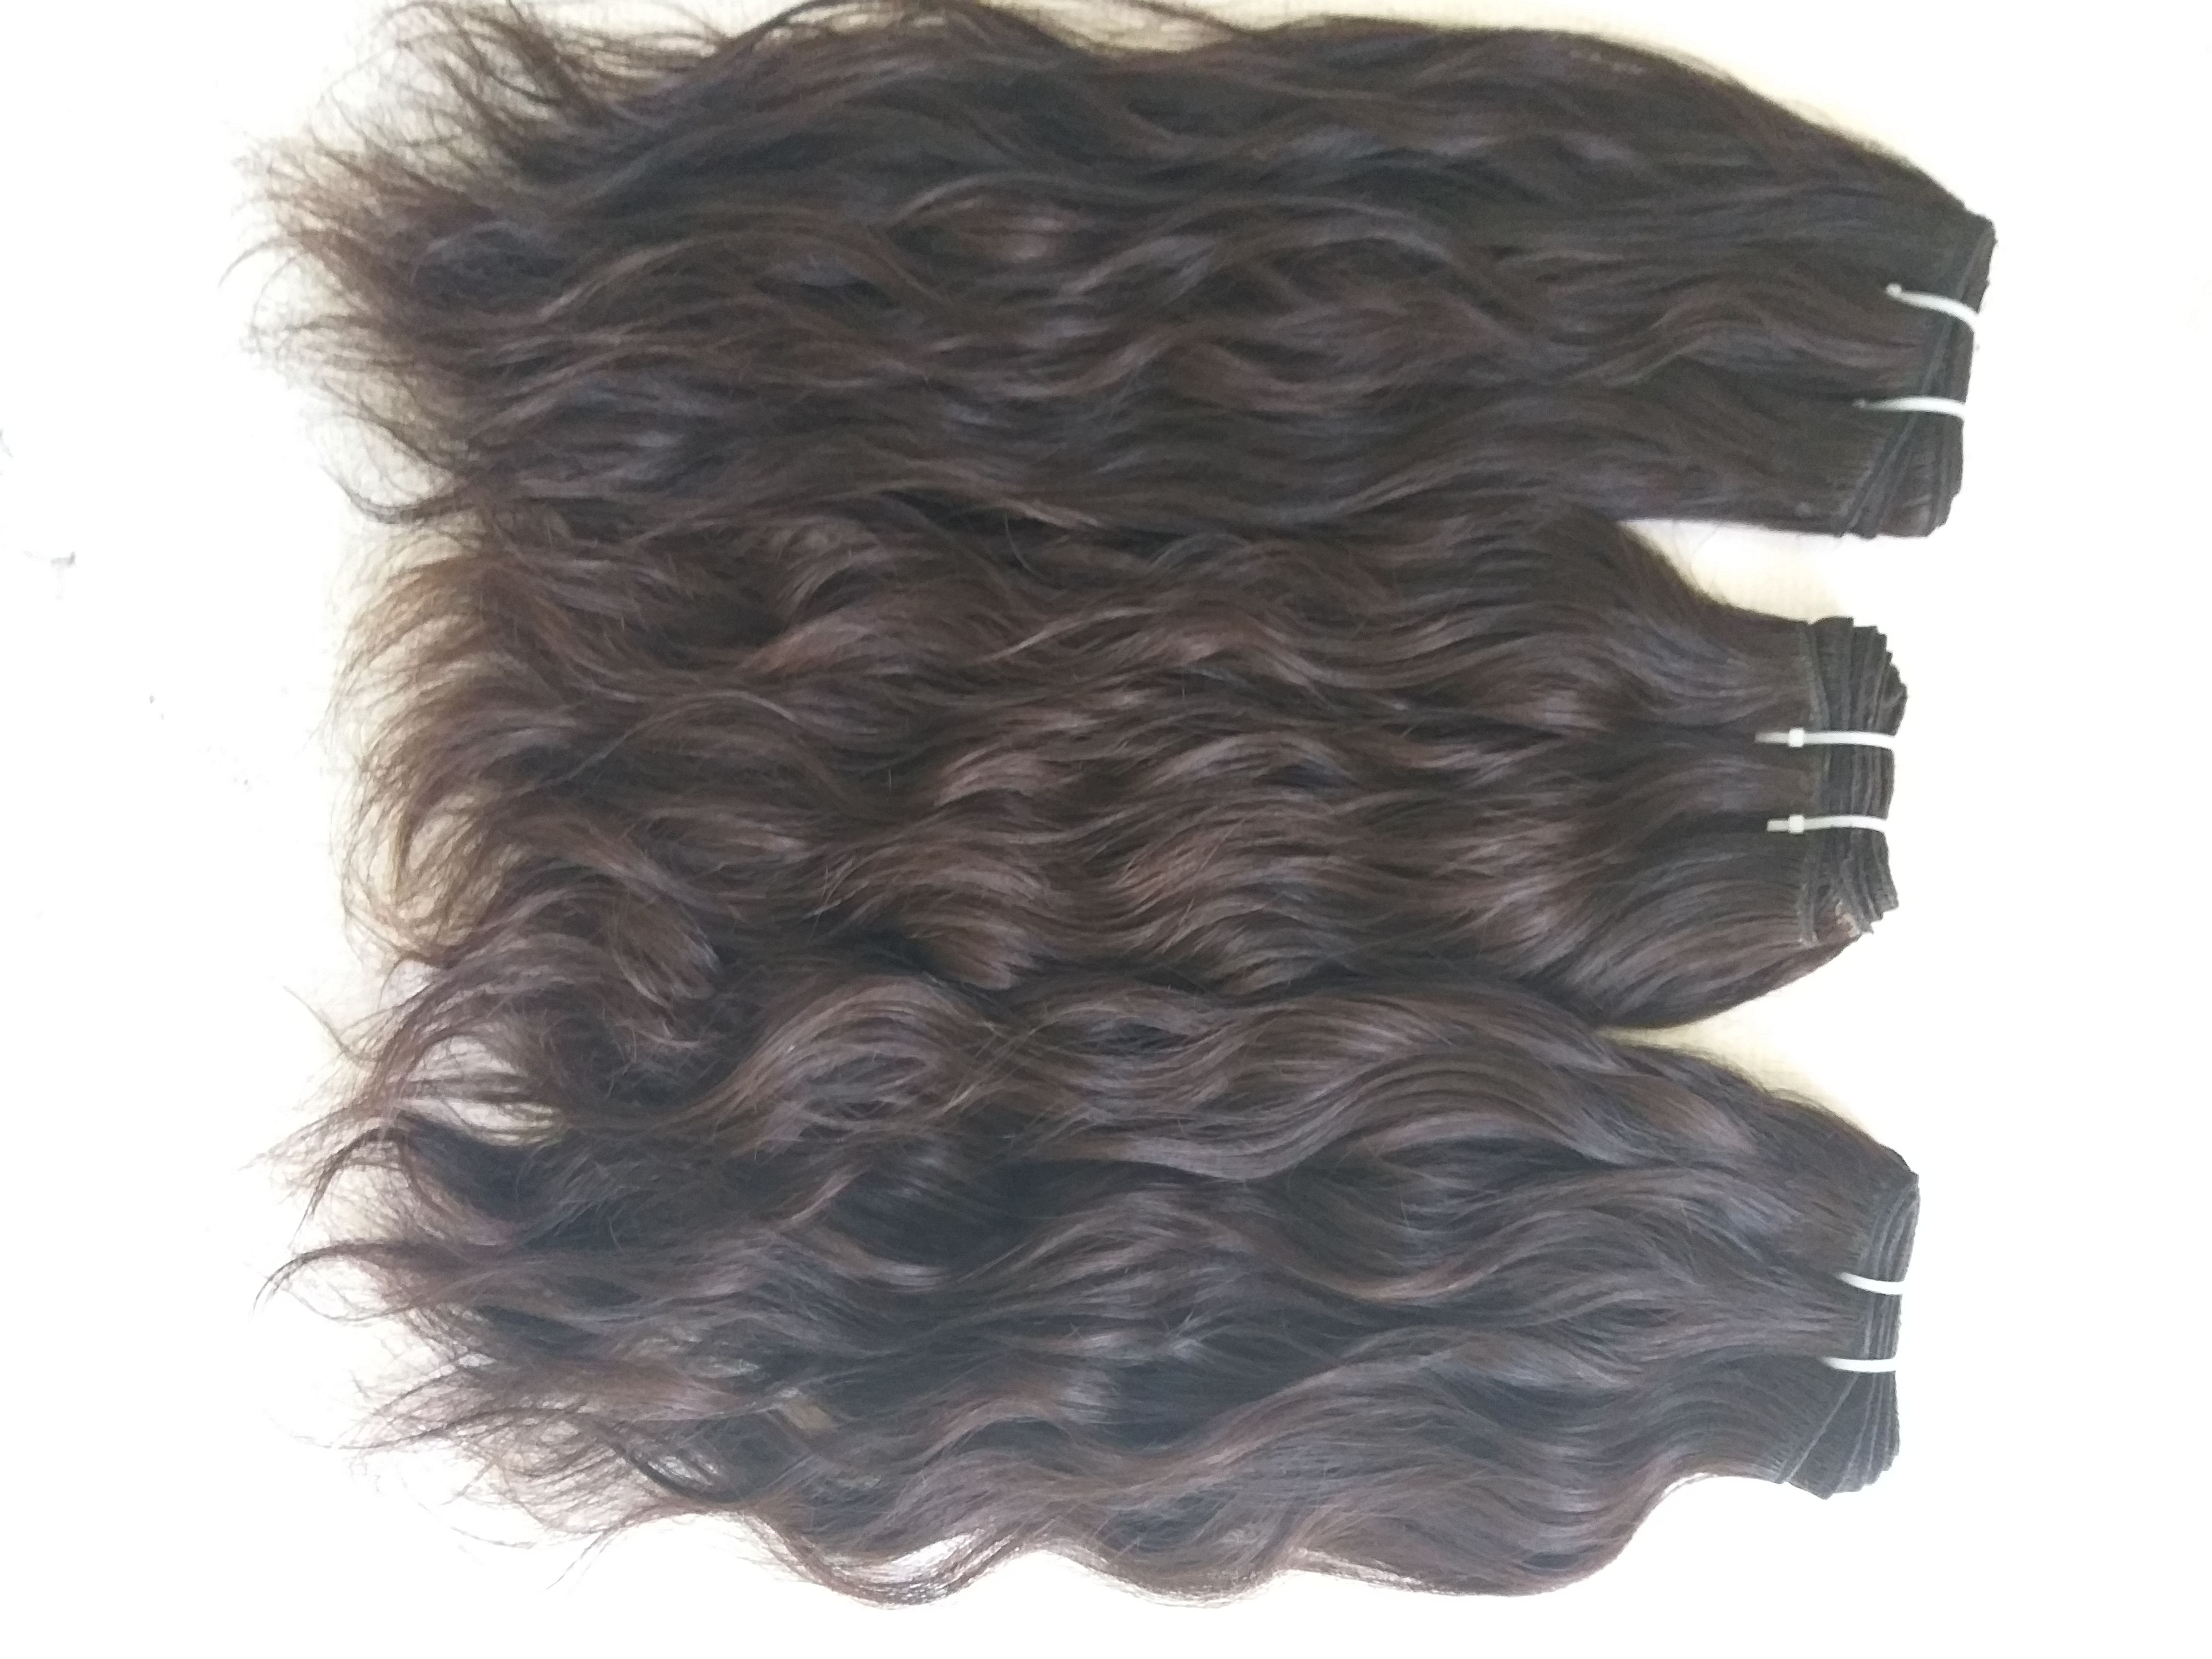 Indian Remy Wavy Human Hair